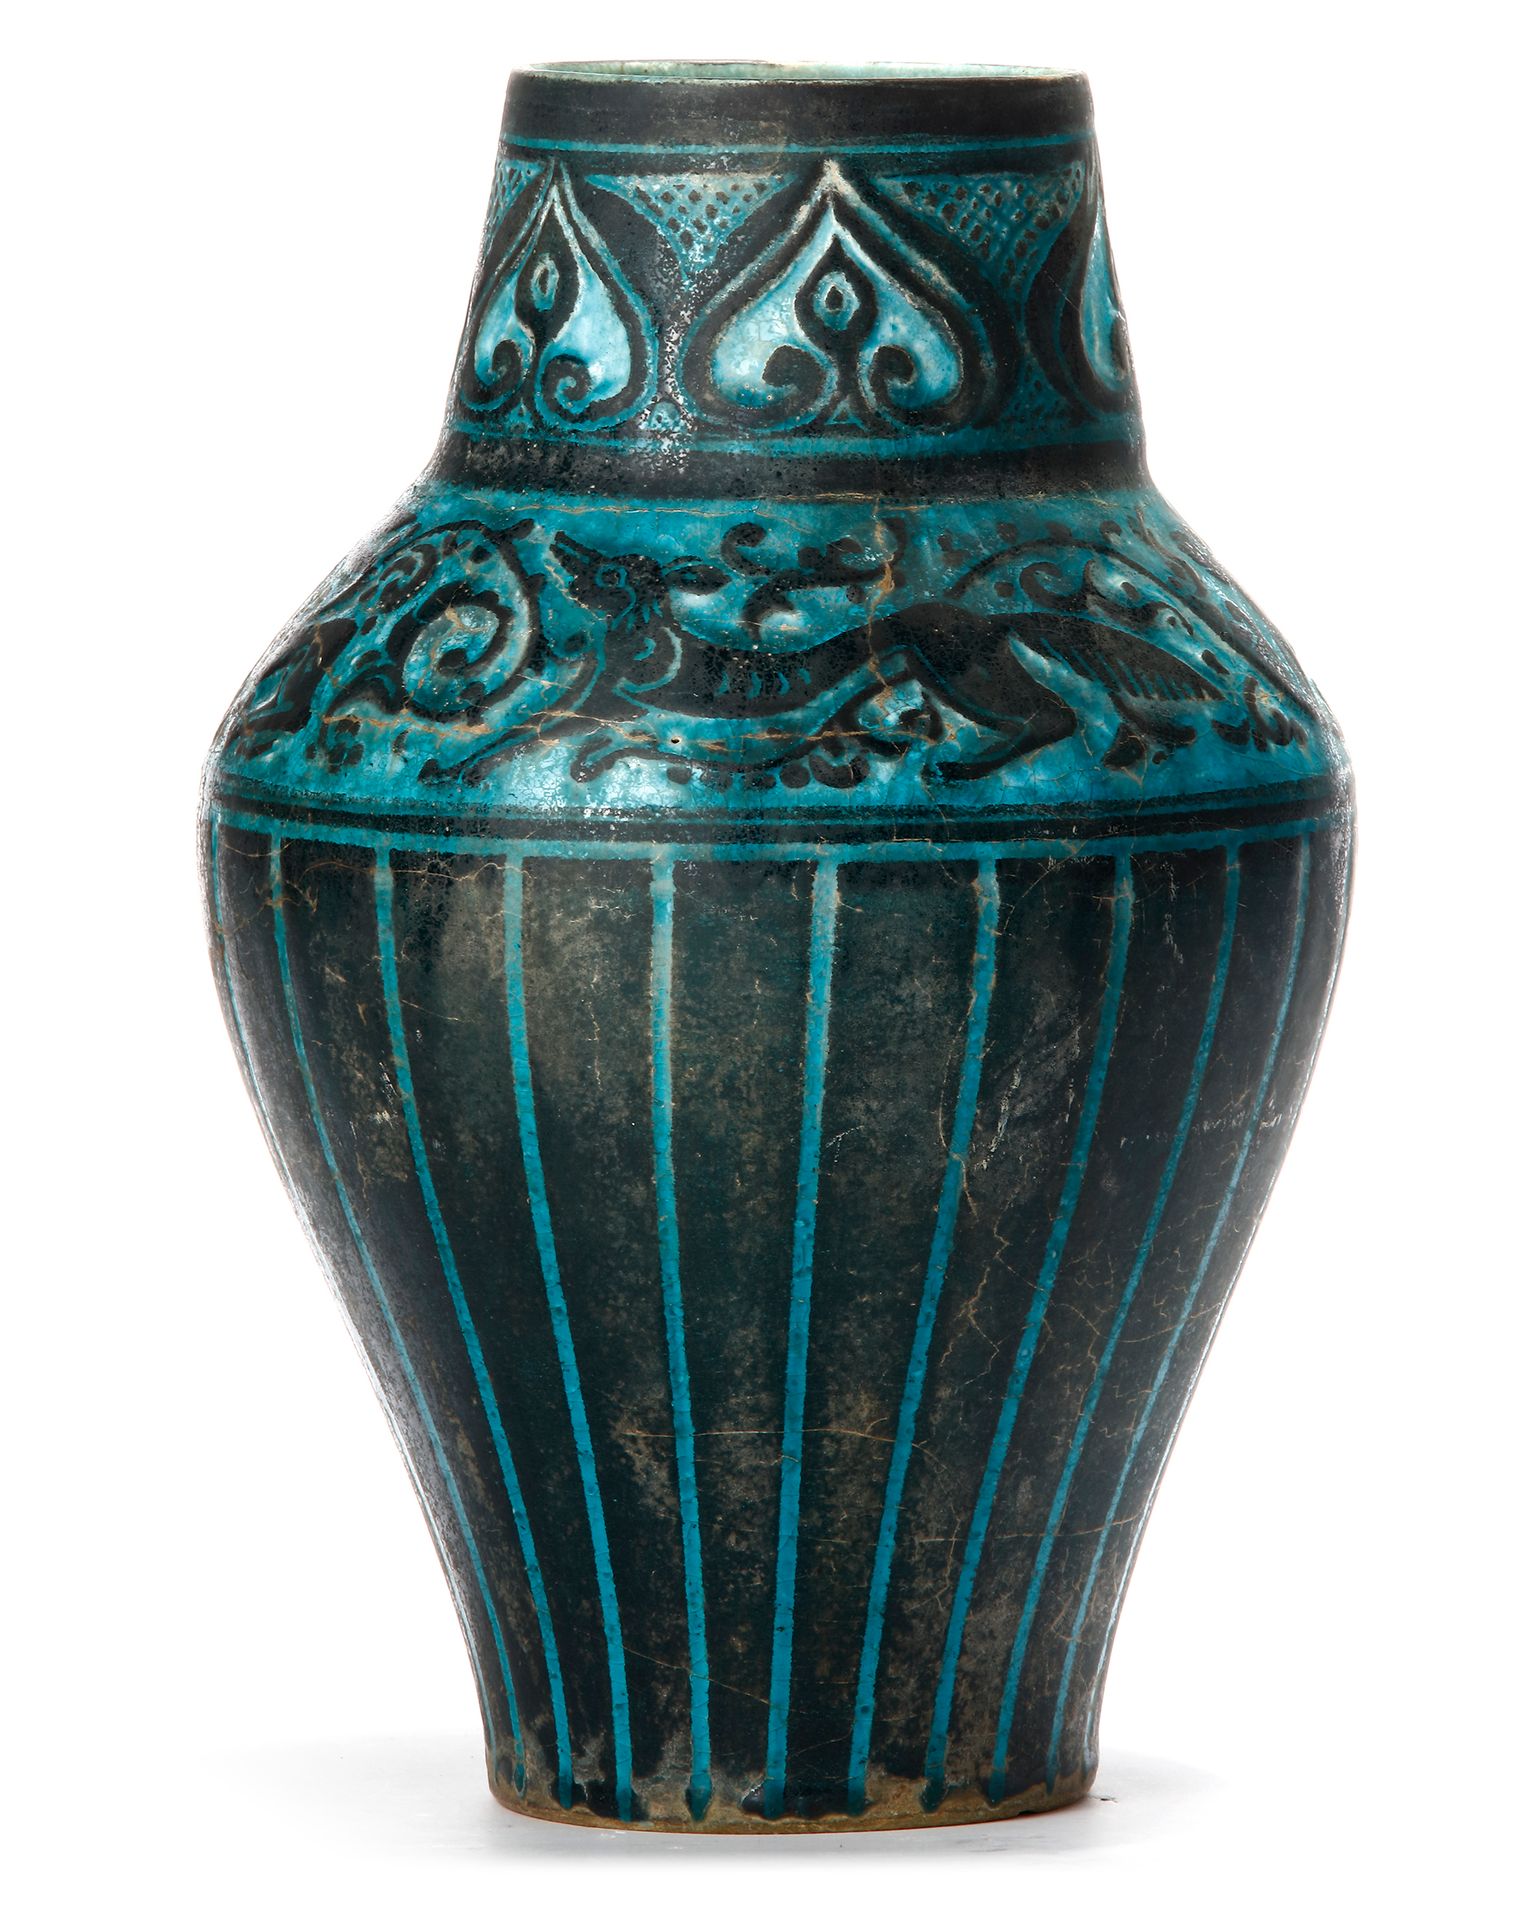 A FINE KASHAN SILHOUETTE-WARE POTTERY VASE, PERSIA, LATE 12TH CENTURY Balusterfo&hellip;